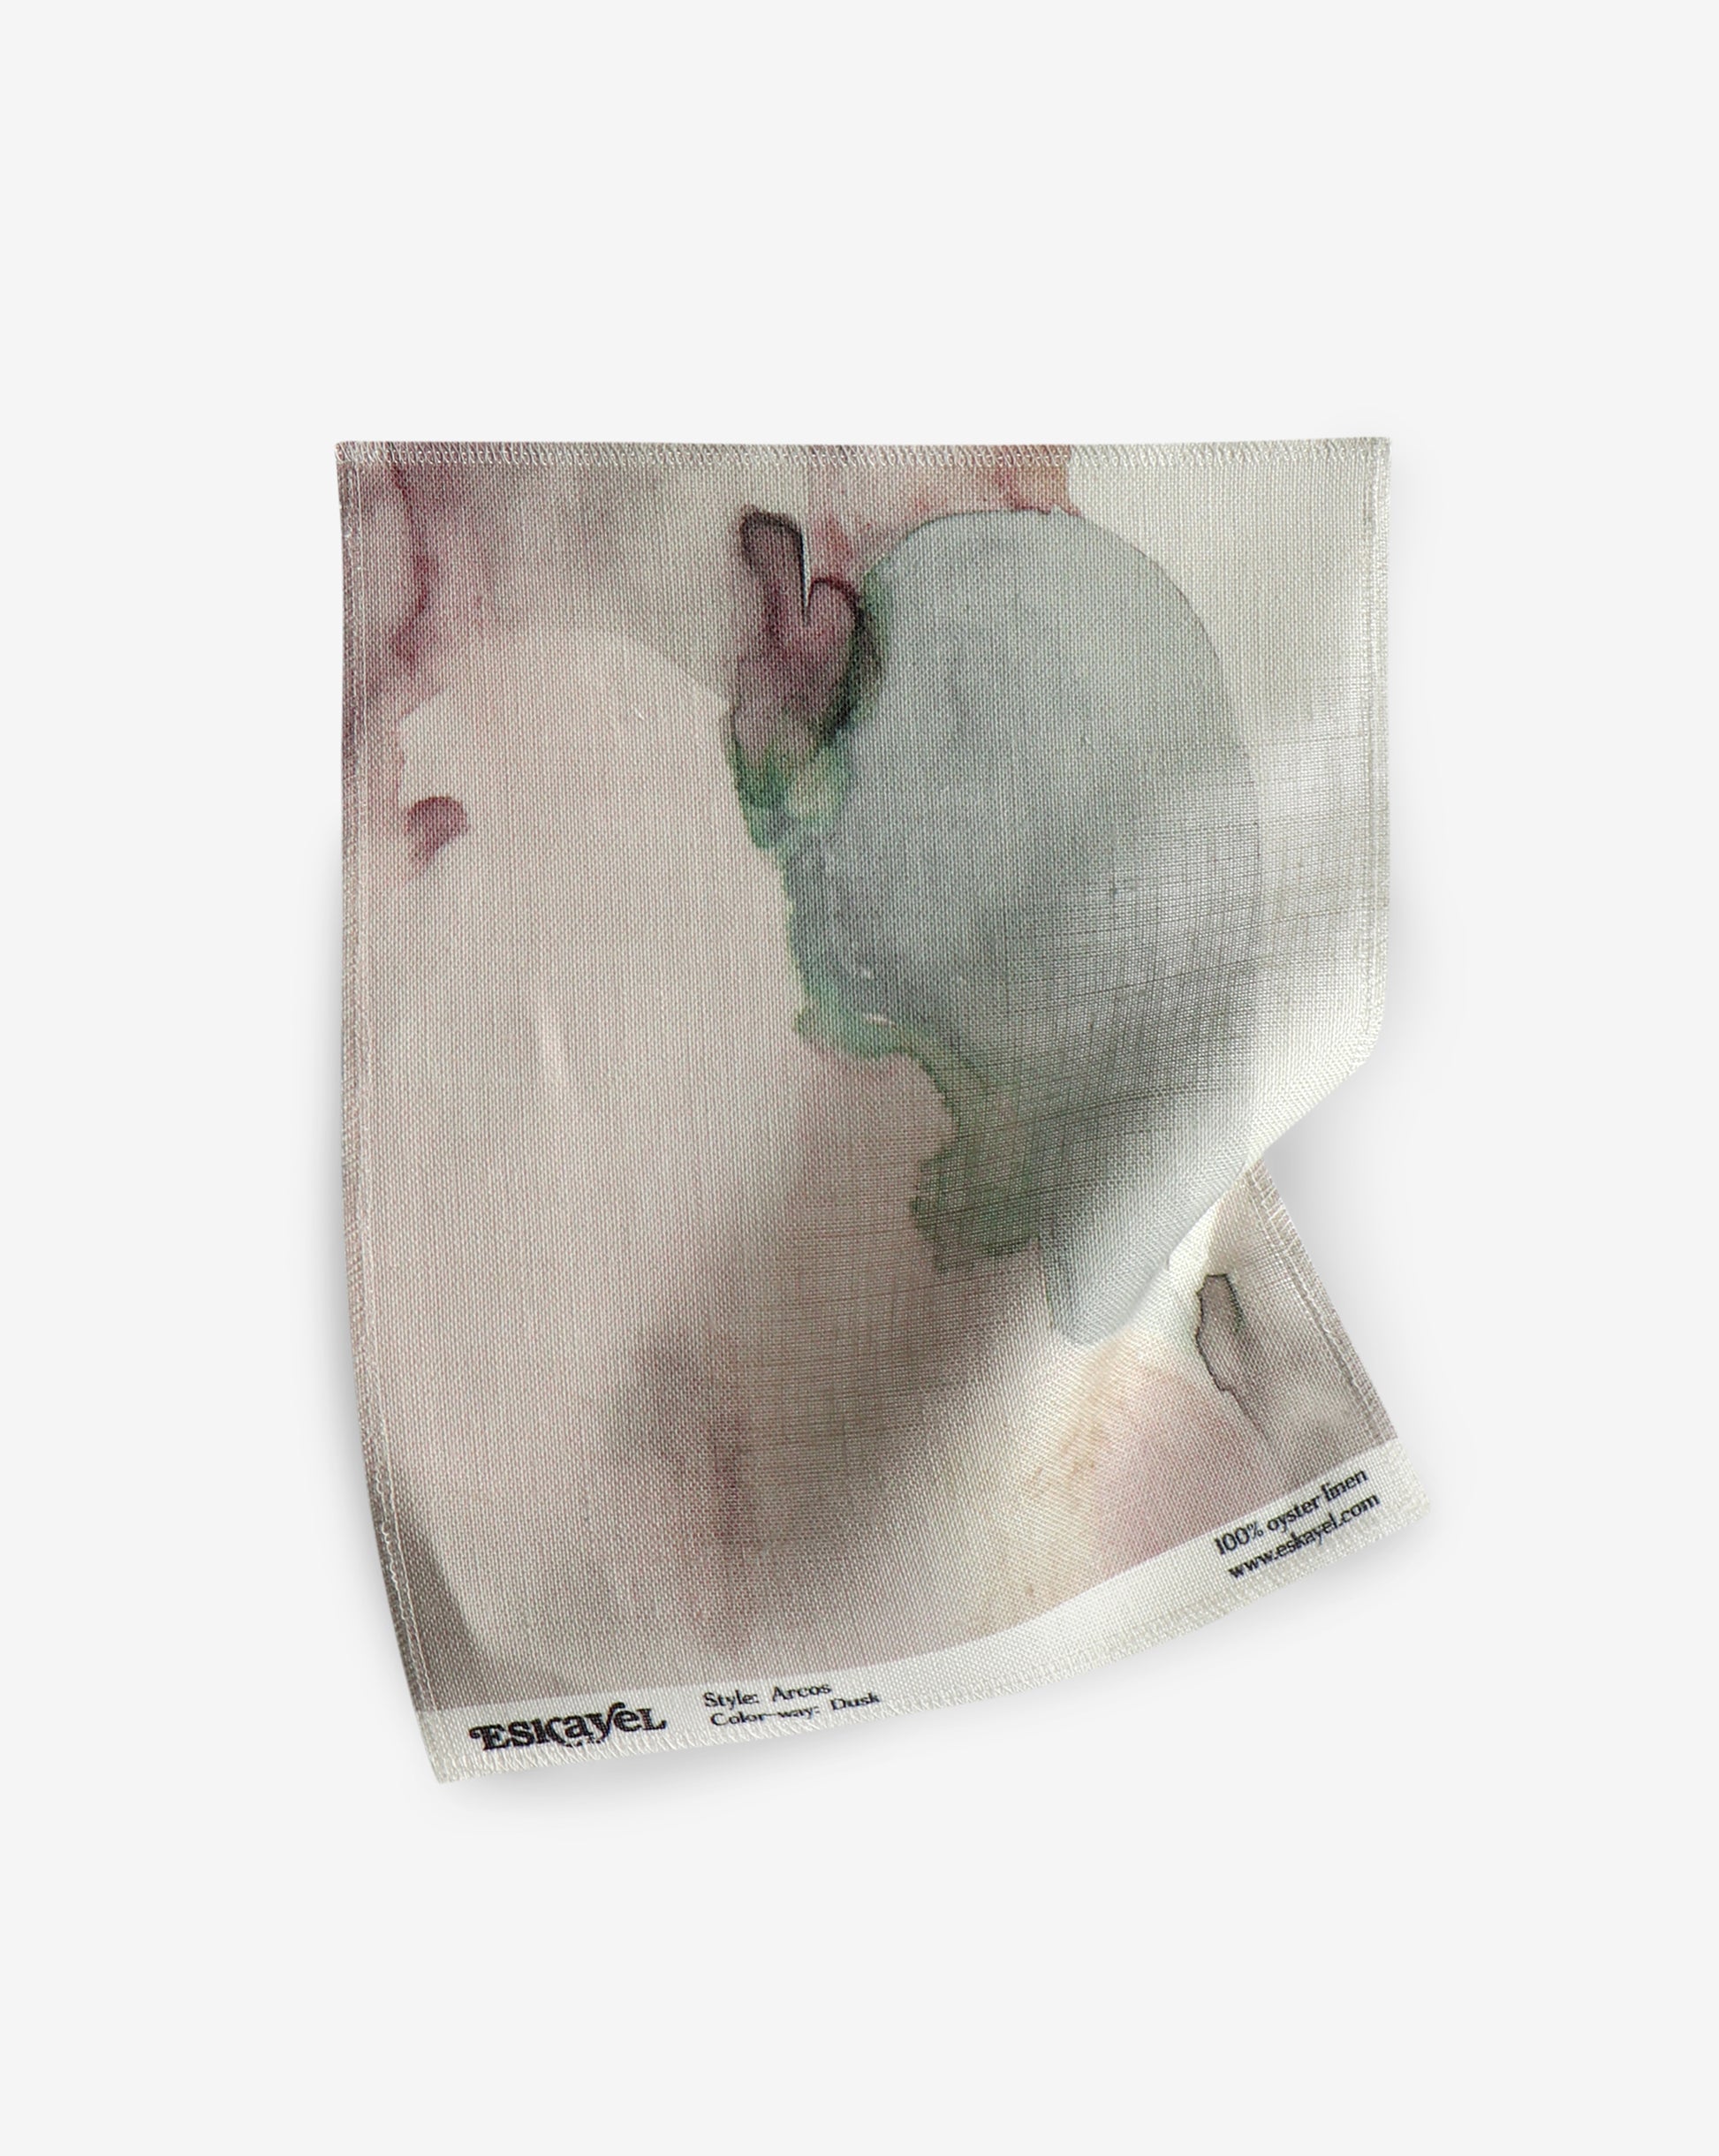 A watercolor painting on a fabric with an Arcos Fabric Dusk design